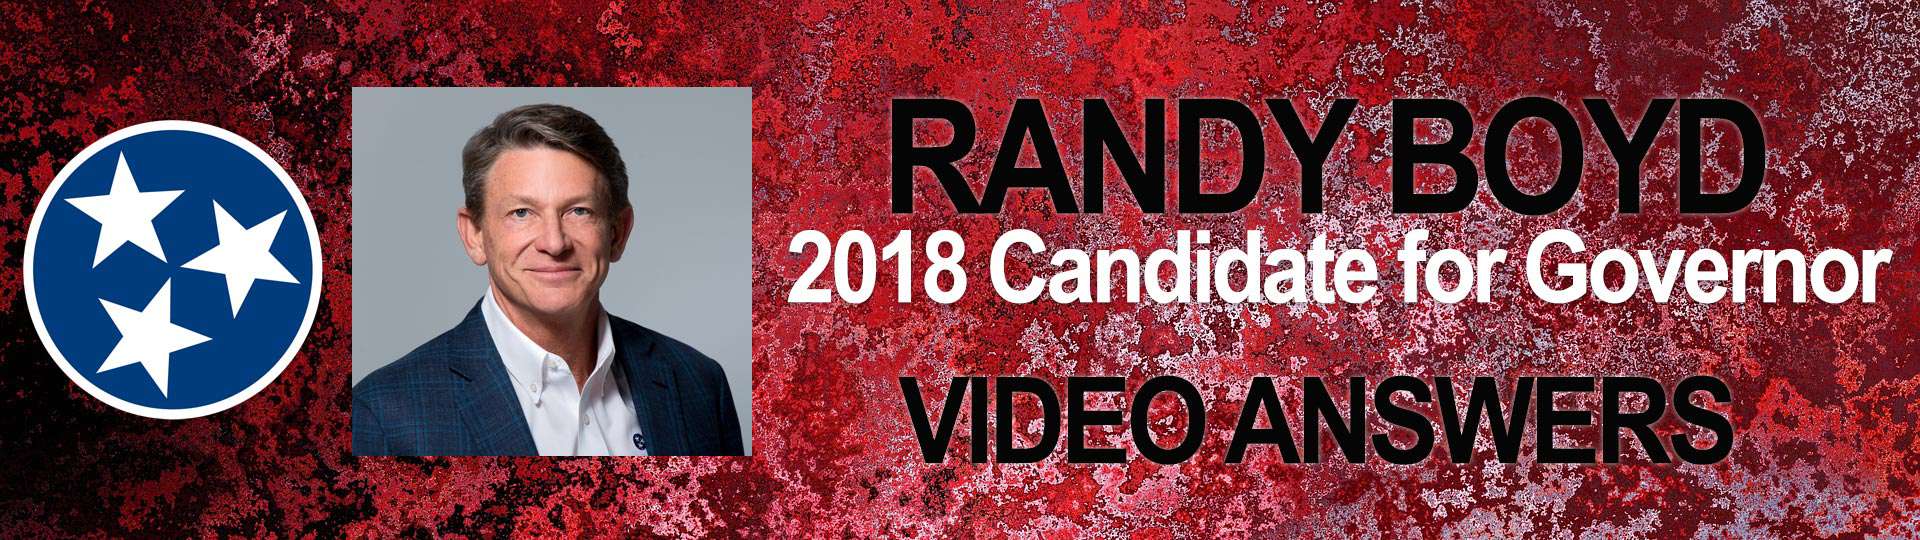 Randy Boyd, 2018 candidate for Tennessee governor